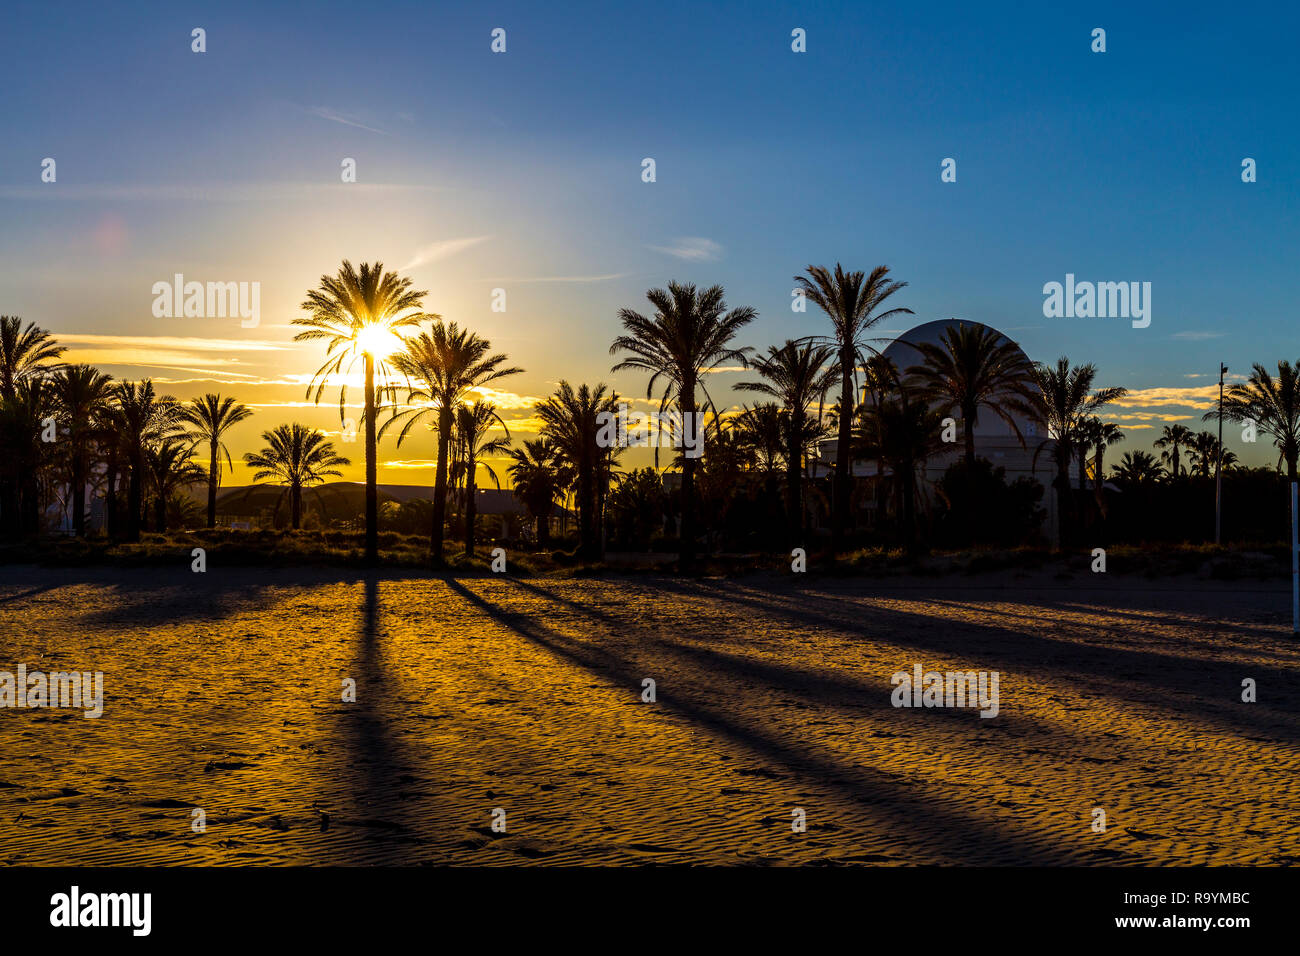 Sunset behind palm trees and silhouette of the Planetarium building at Pinar Beach (Playa del Pinar) in Castellon de la Plana, Spain Stock Photo